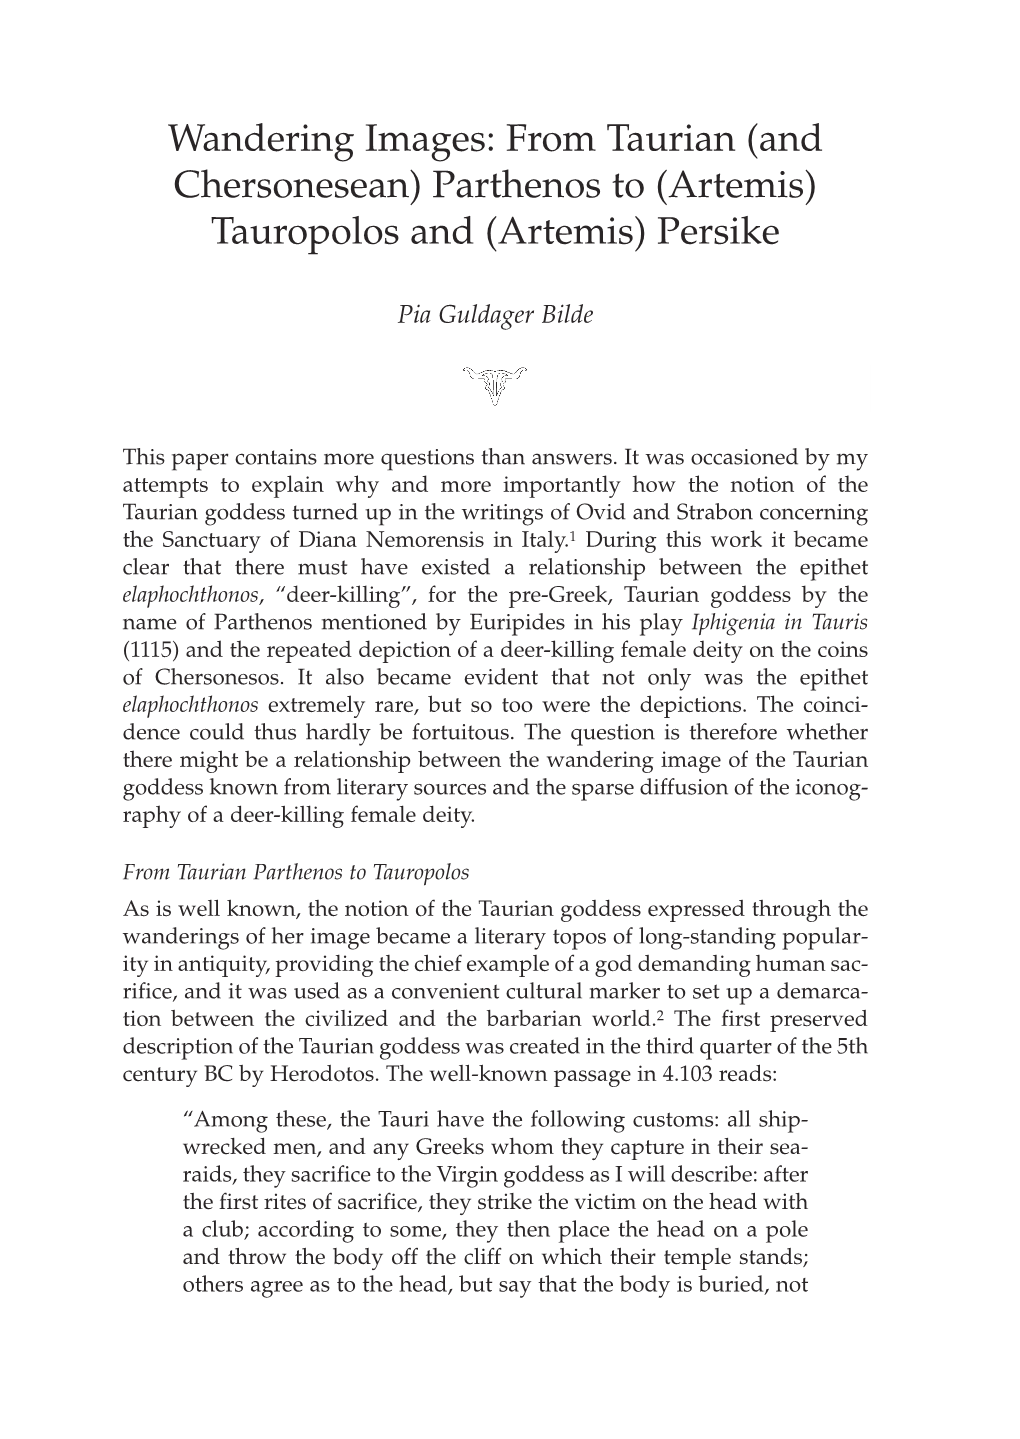 From Taurian (And Chersonesean) Parthenos to (Artemis) Tauropolos and (Artemis) Persike